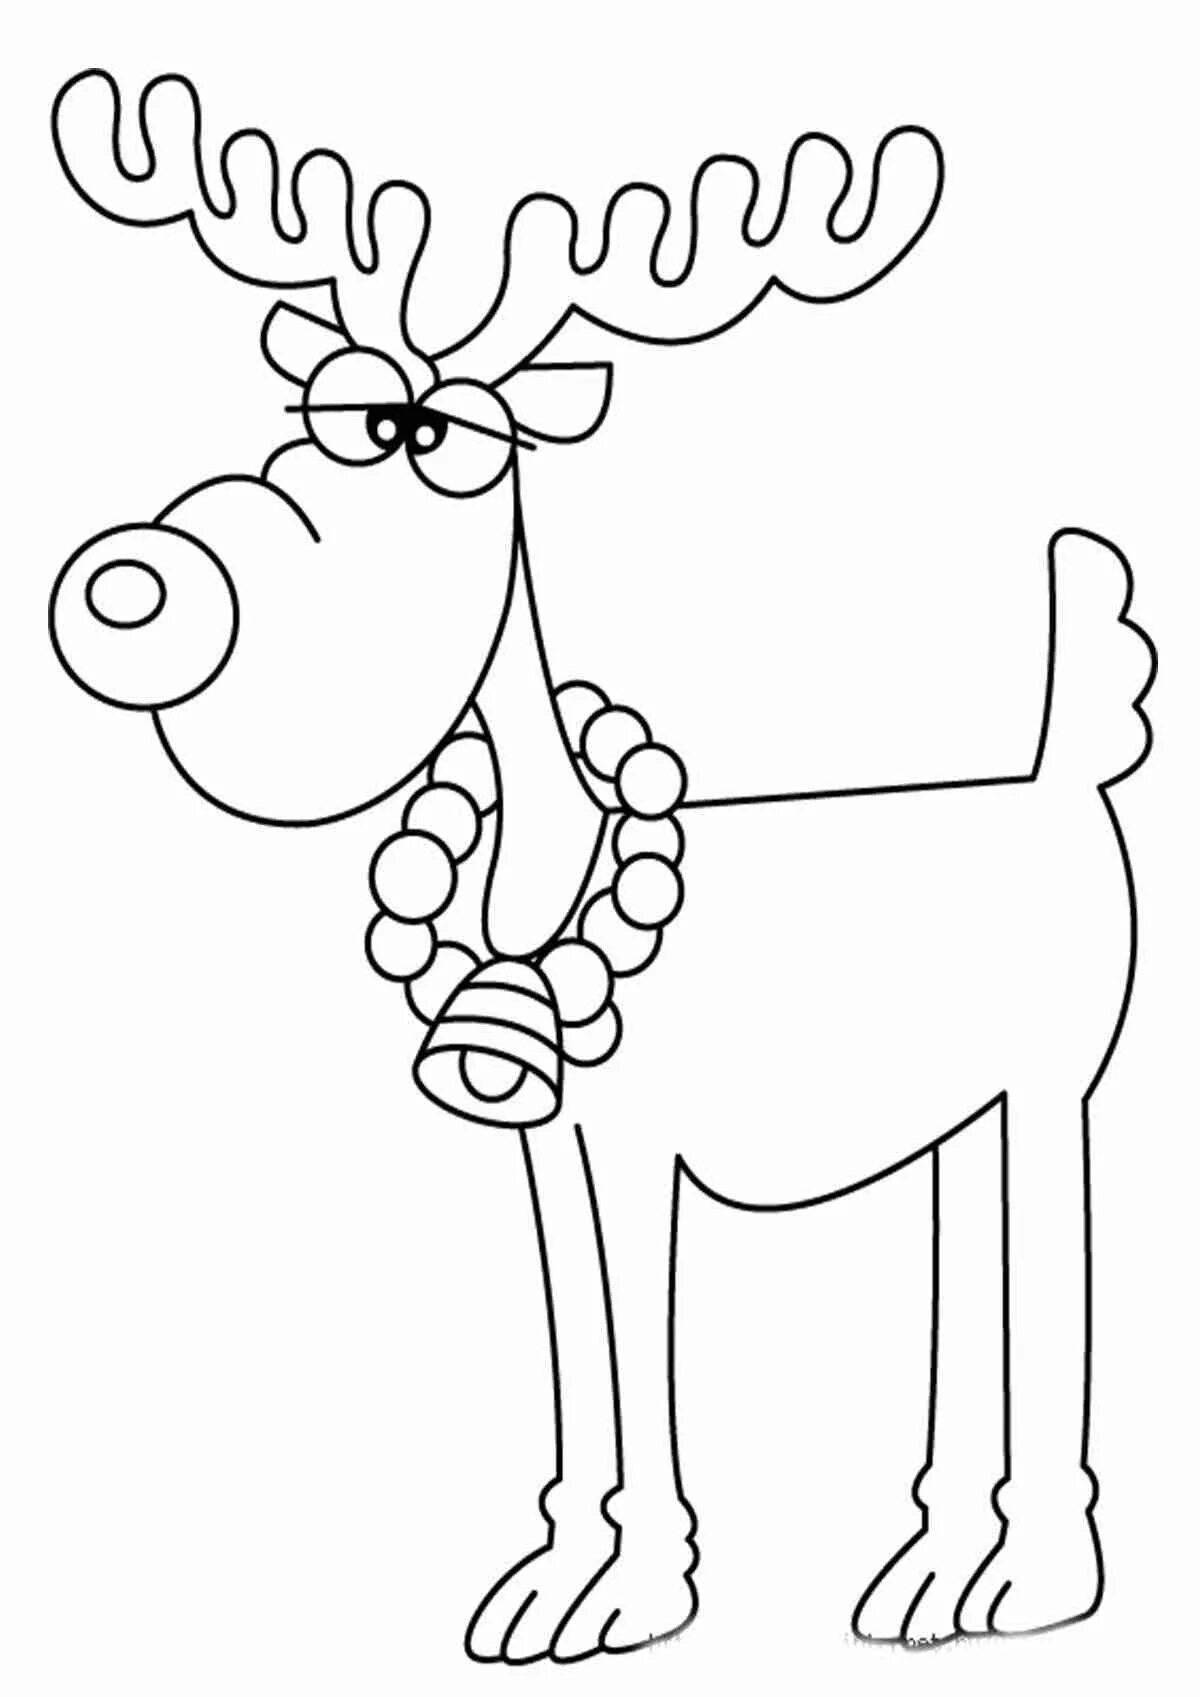 Christmas deer playful coloring page for kids